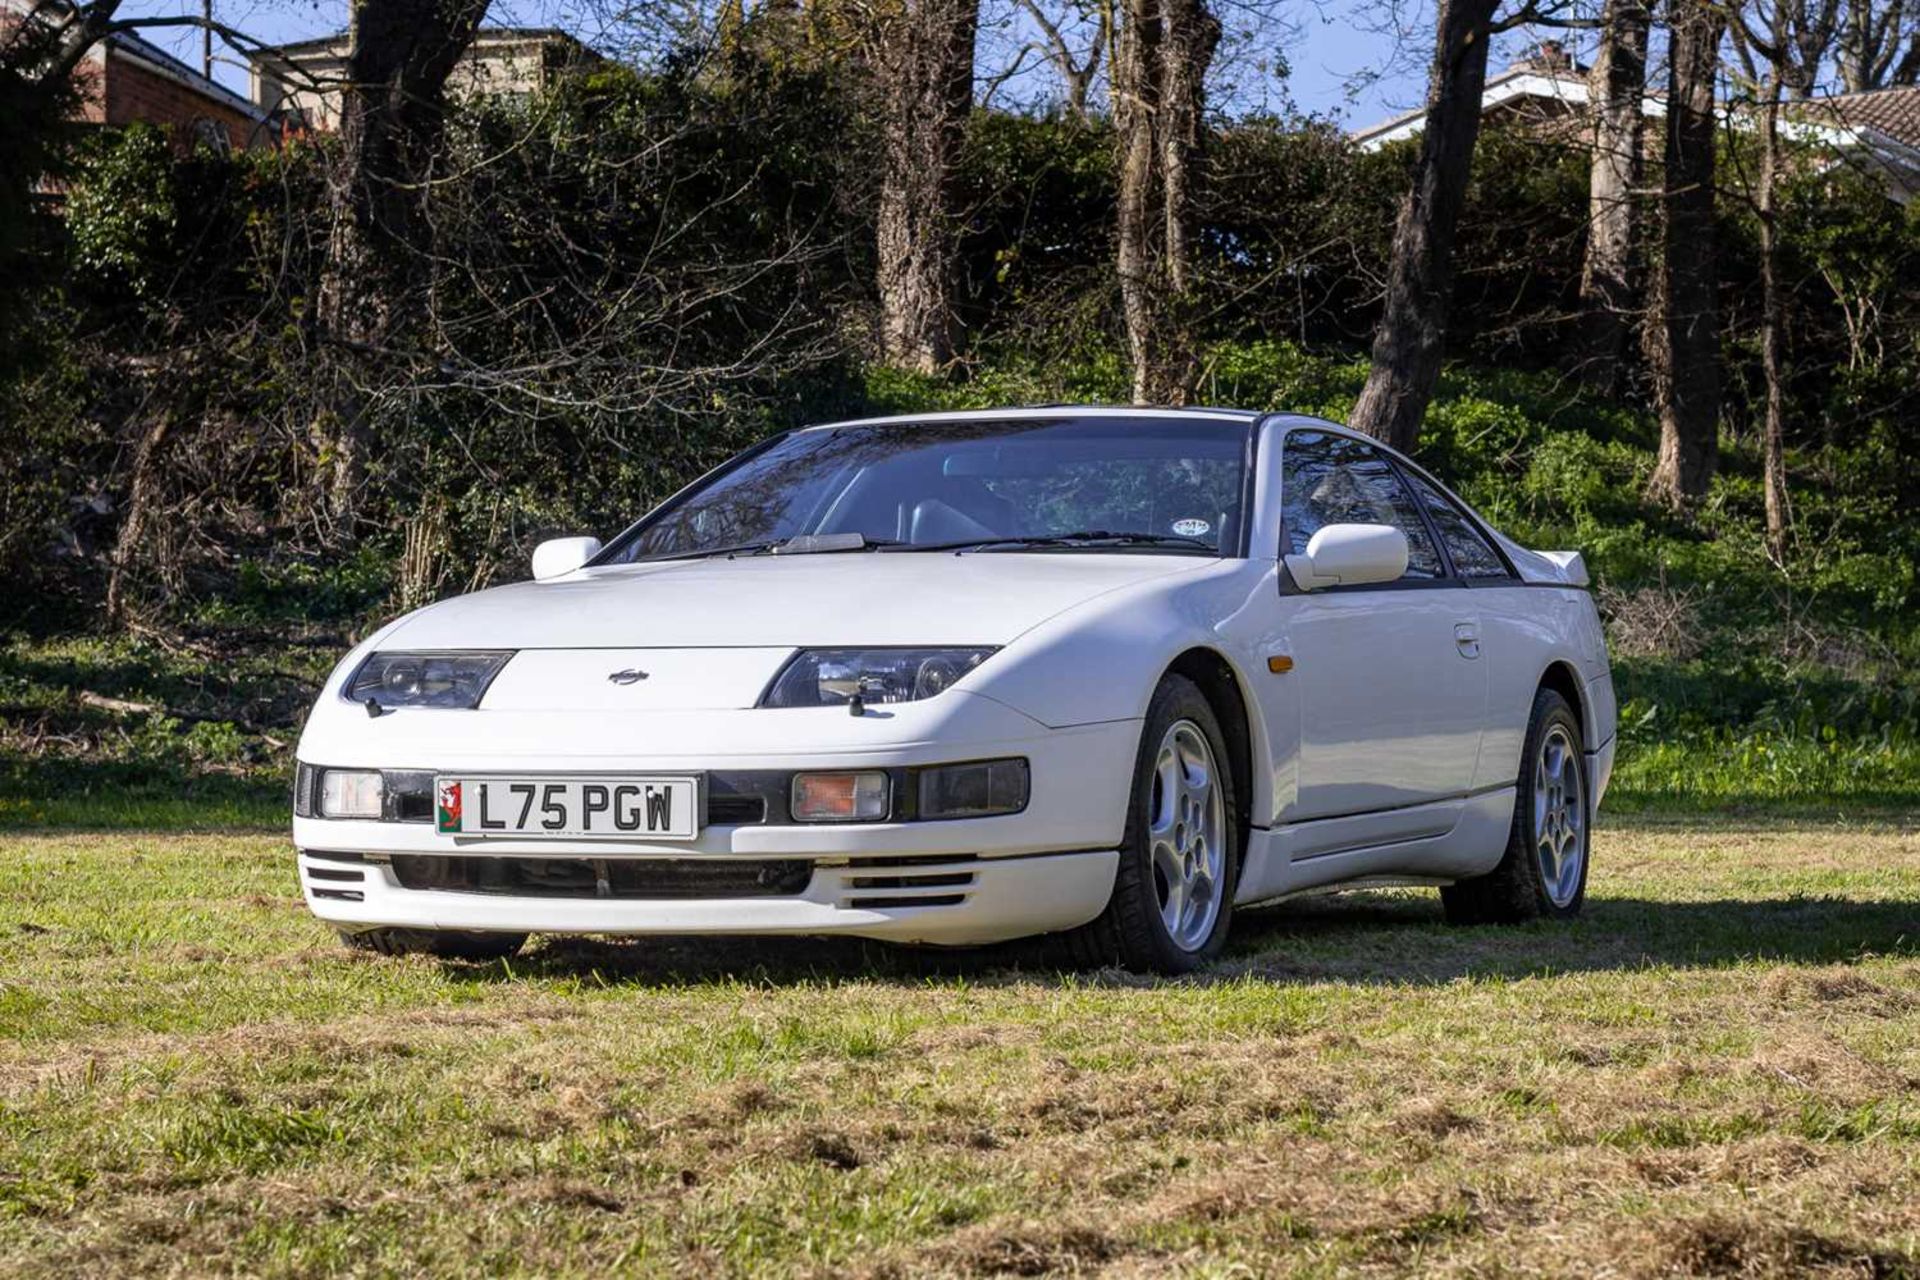 1990 Nissan 300ZX Turbo 2+2 Targa One of the last examples registered in the UK - Image 7 of 89